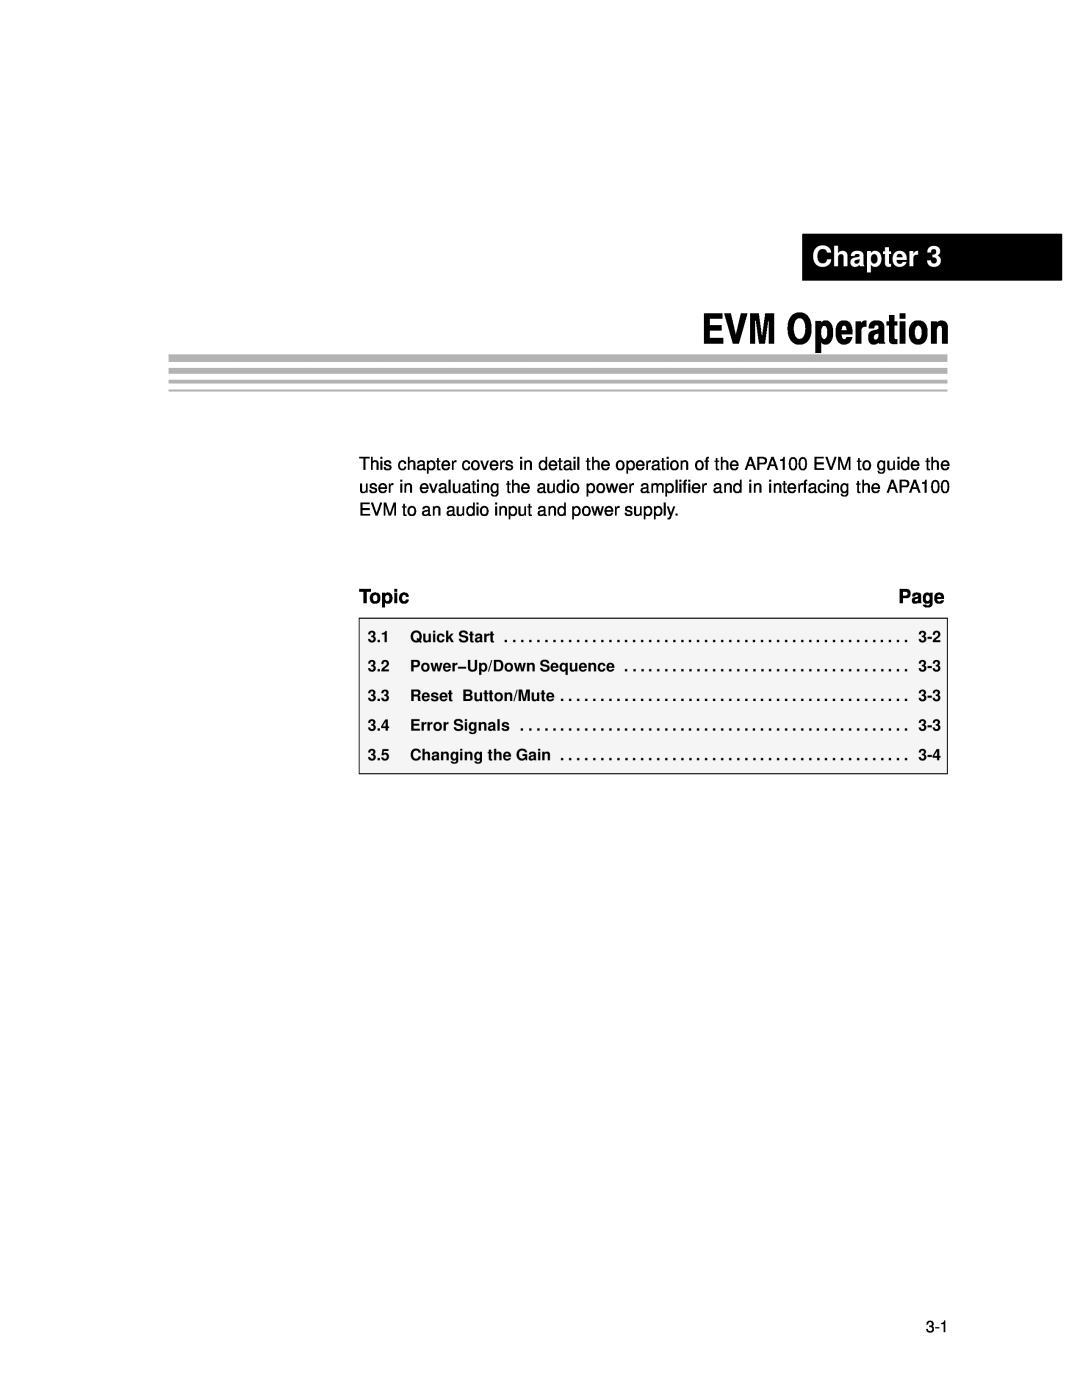 Texas Instruments APA100 manual EVM Operation, Chapter, Page, Topic 